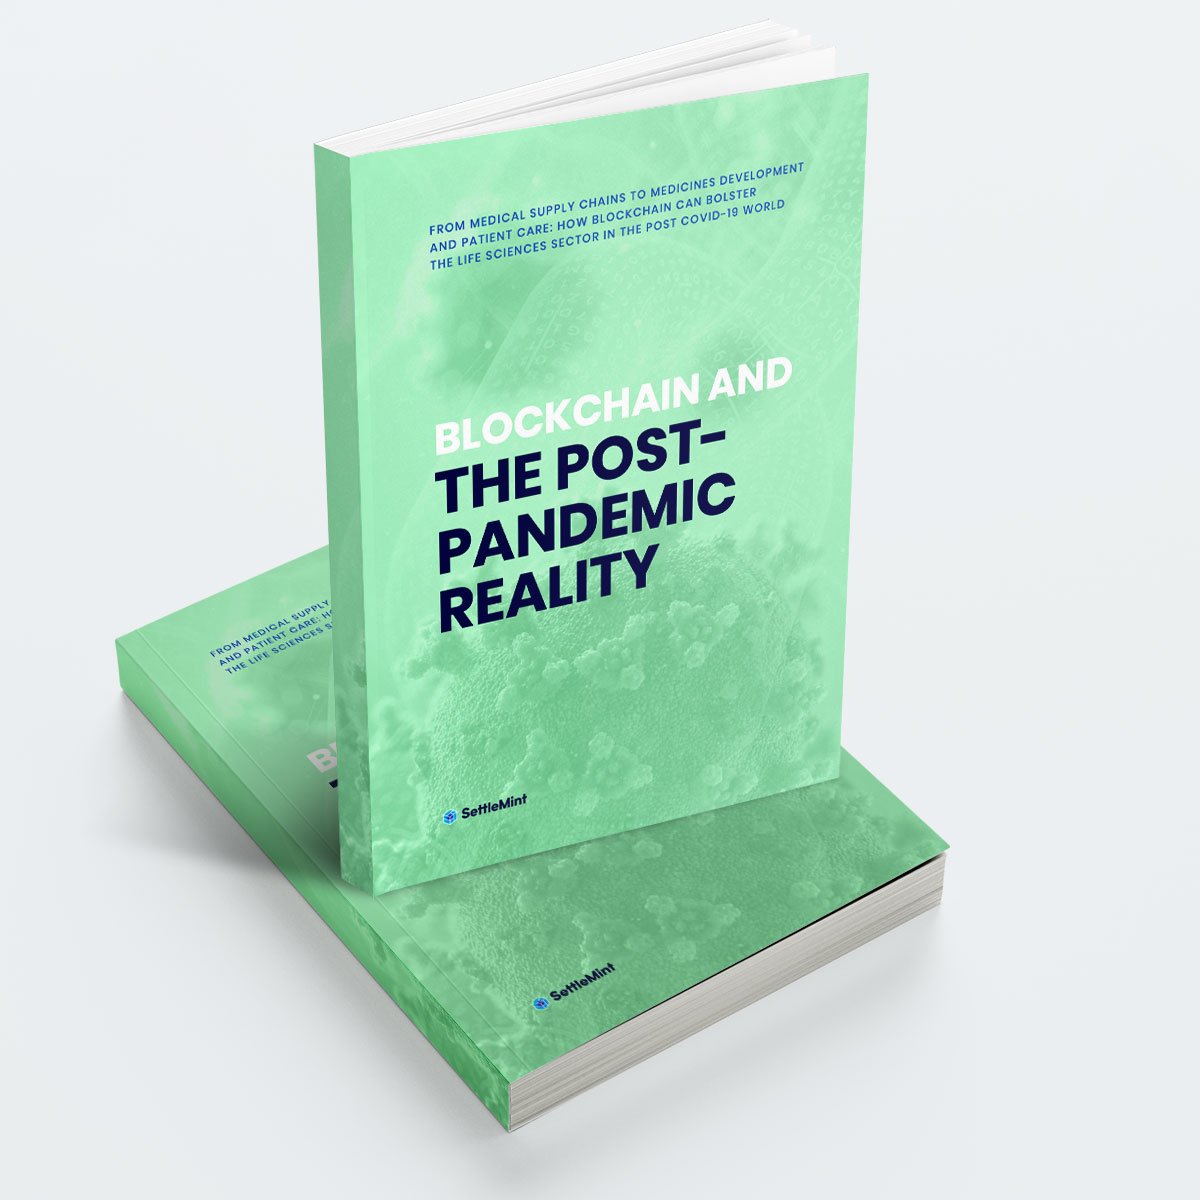 Download Free Mini-Book - Blockchain and the Post-Pandemic Reality 